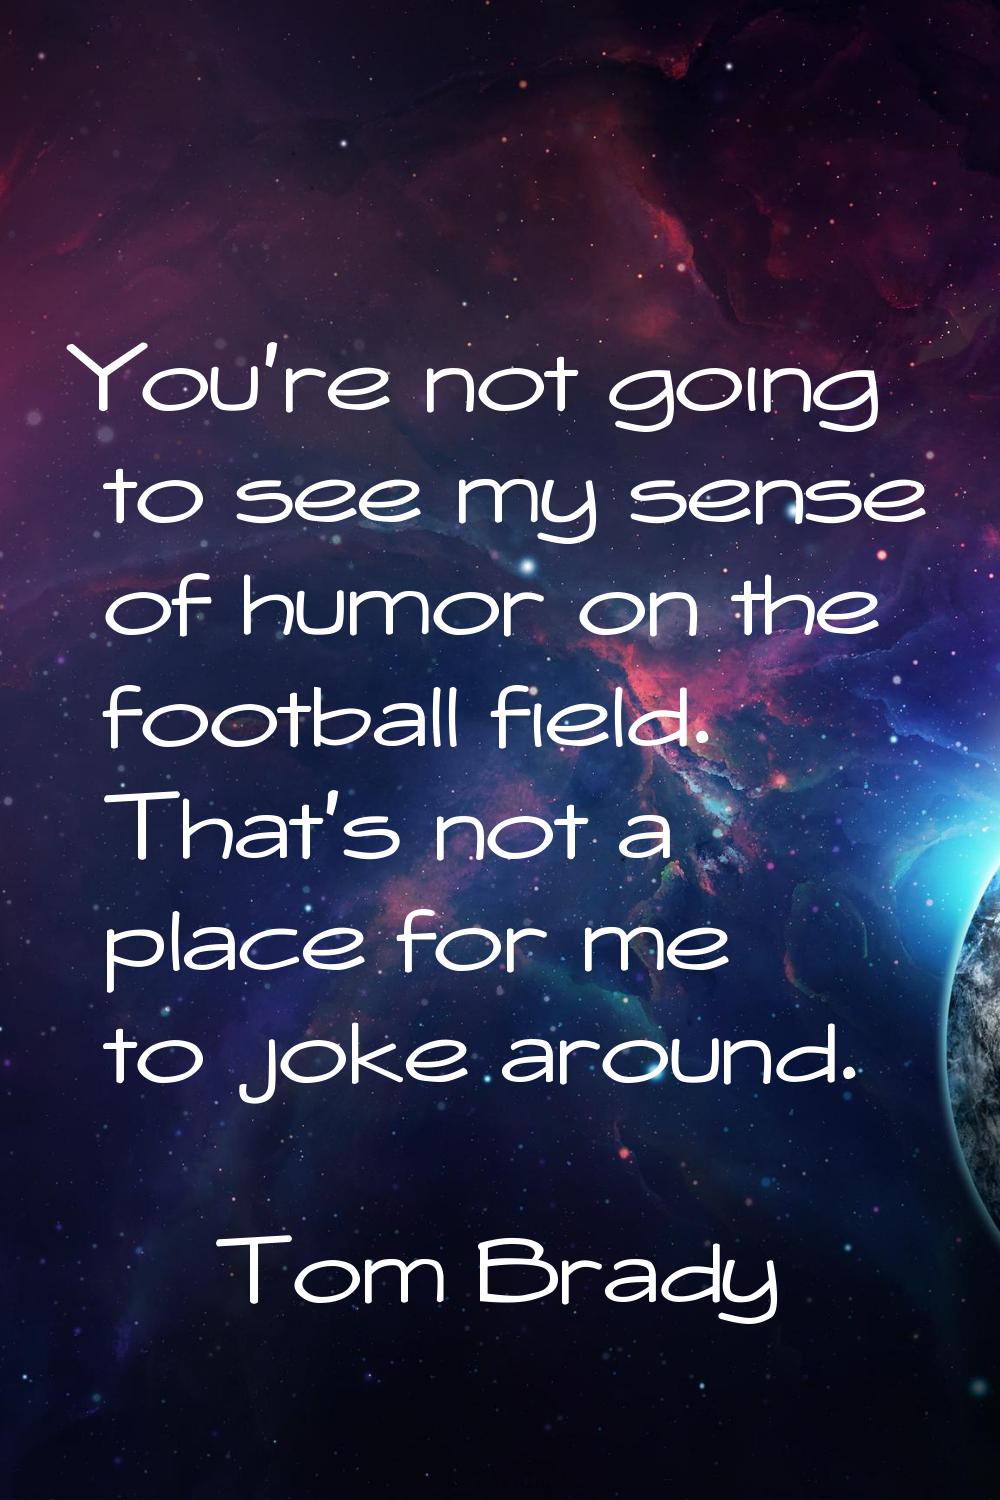 You're not going to see my sense of humor on the football field. That's not a place for me to joke 